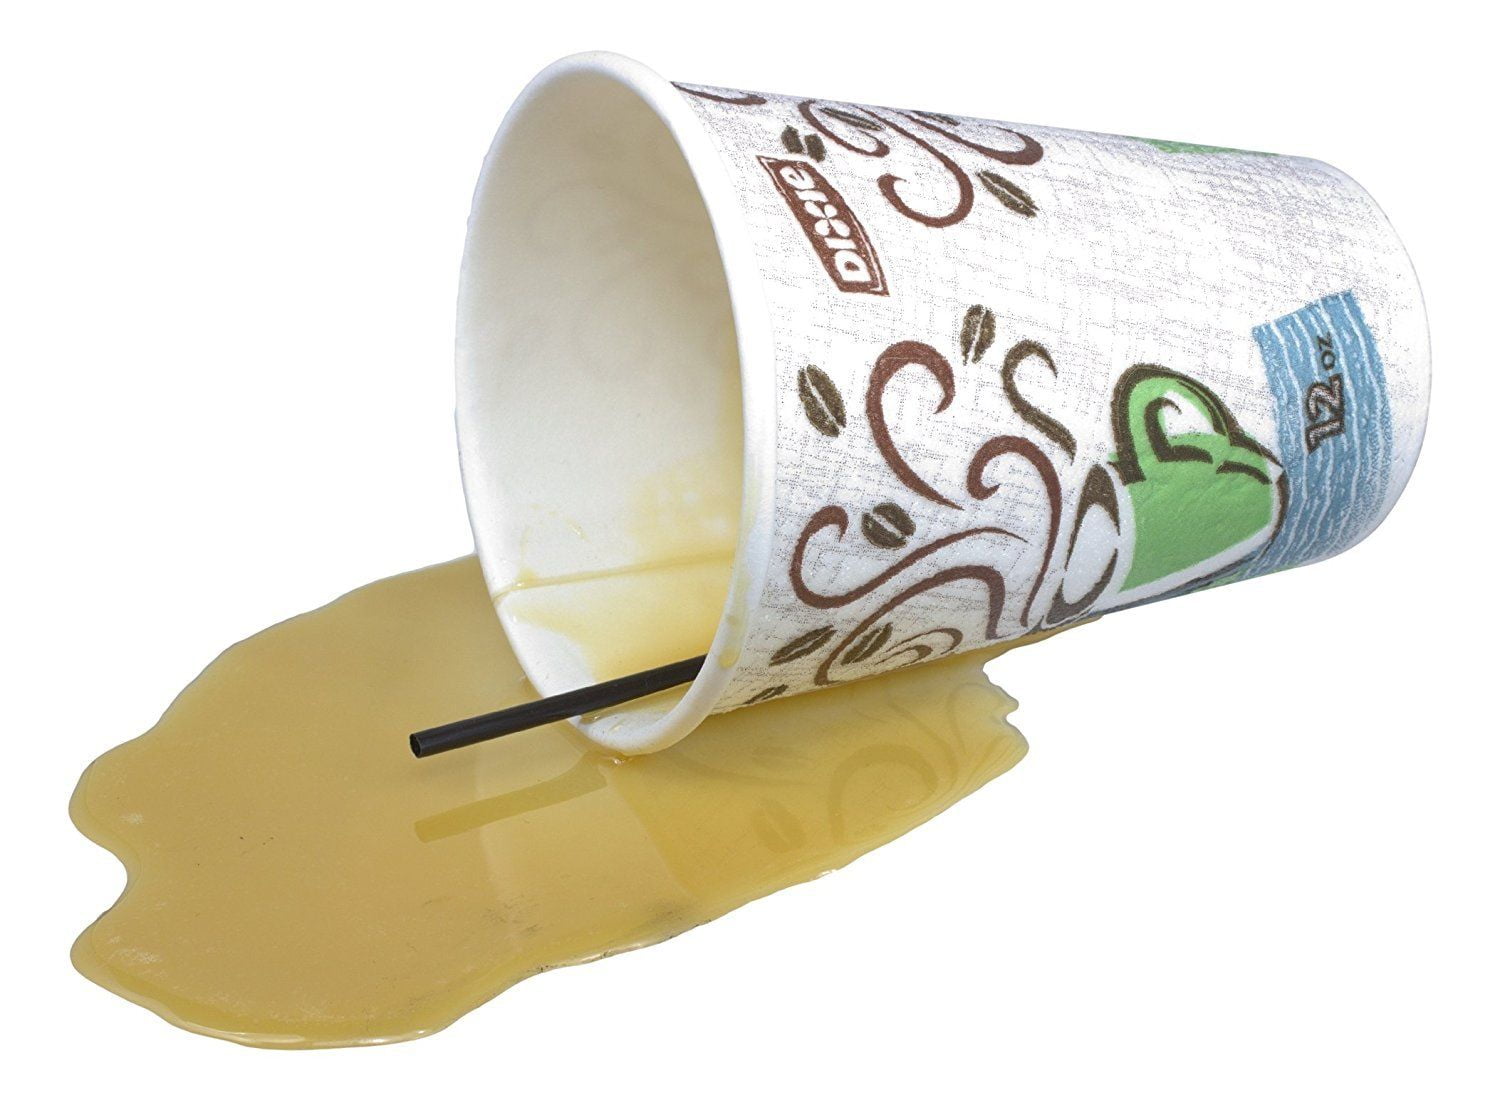 Coffee Spill #2 - $12.95 : Fake Spills, The most realistic fake spills!